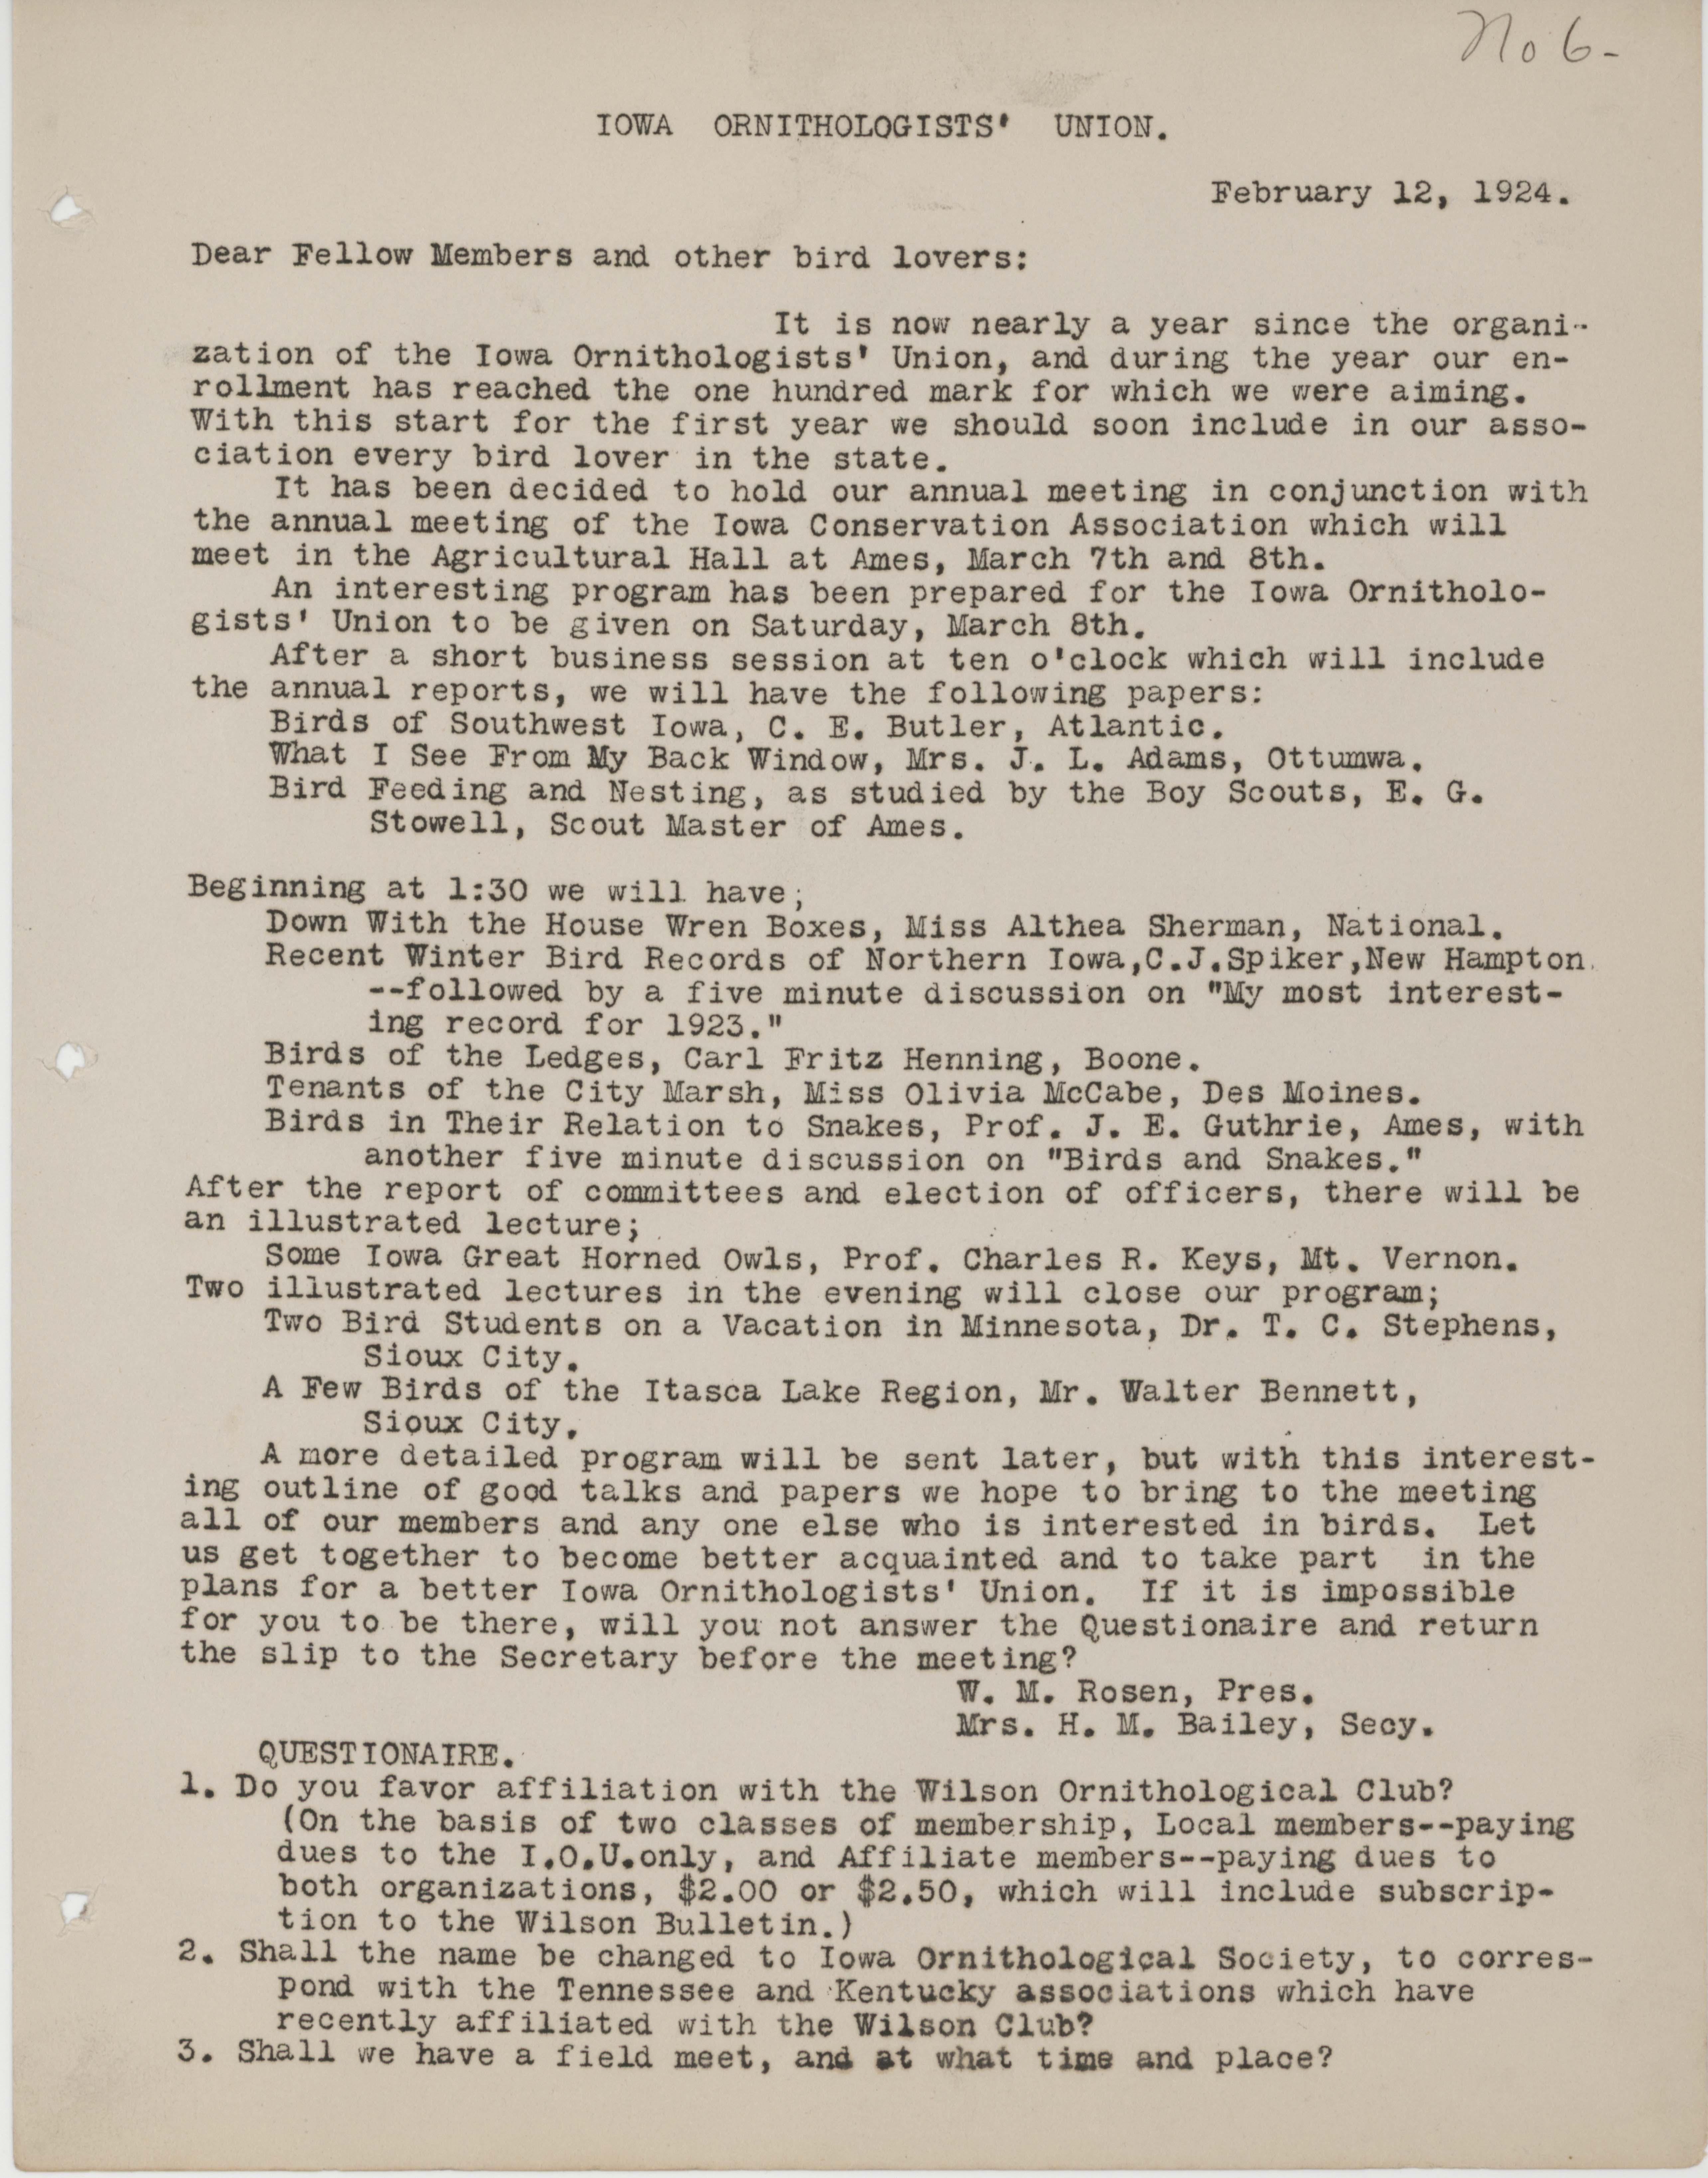 Letter to members of the Iowa Ornithologists' Union regarding the upcoming annual meeting, February 12, 1924